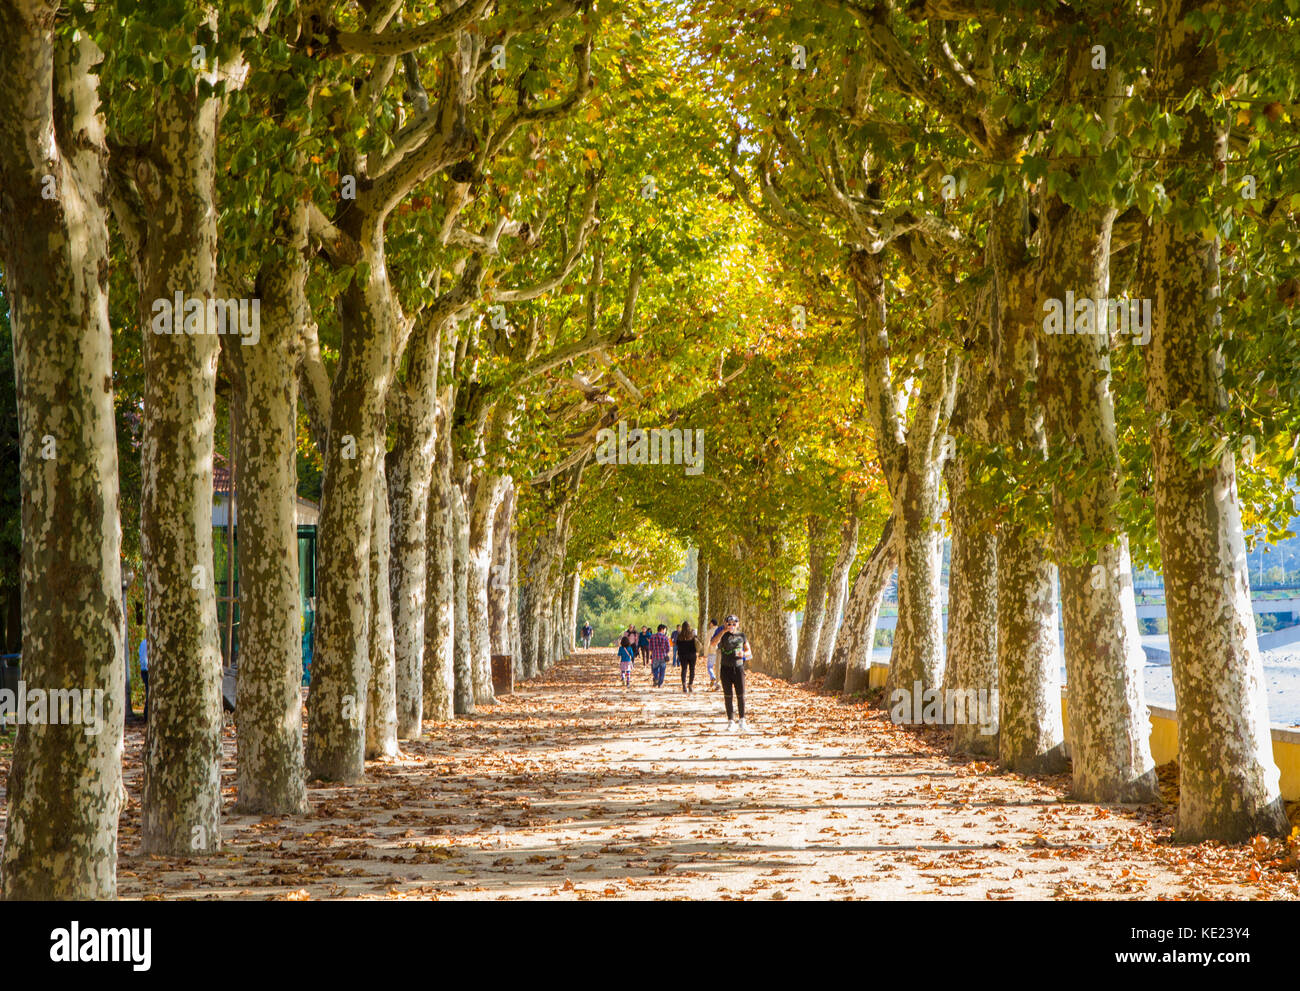 a tree lined path in coimbra Stock Photo